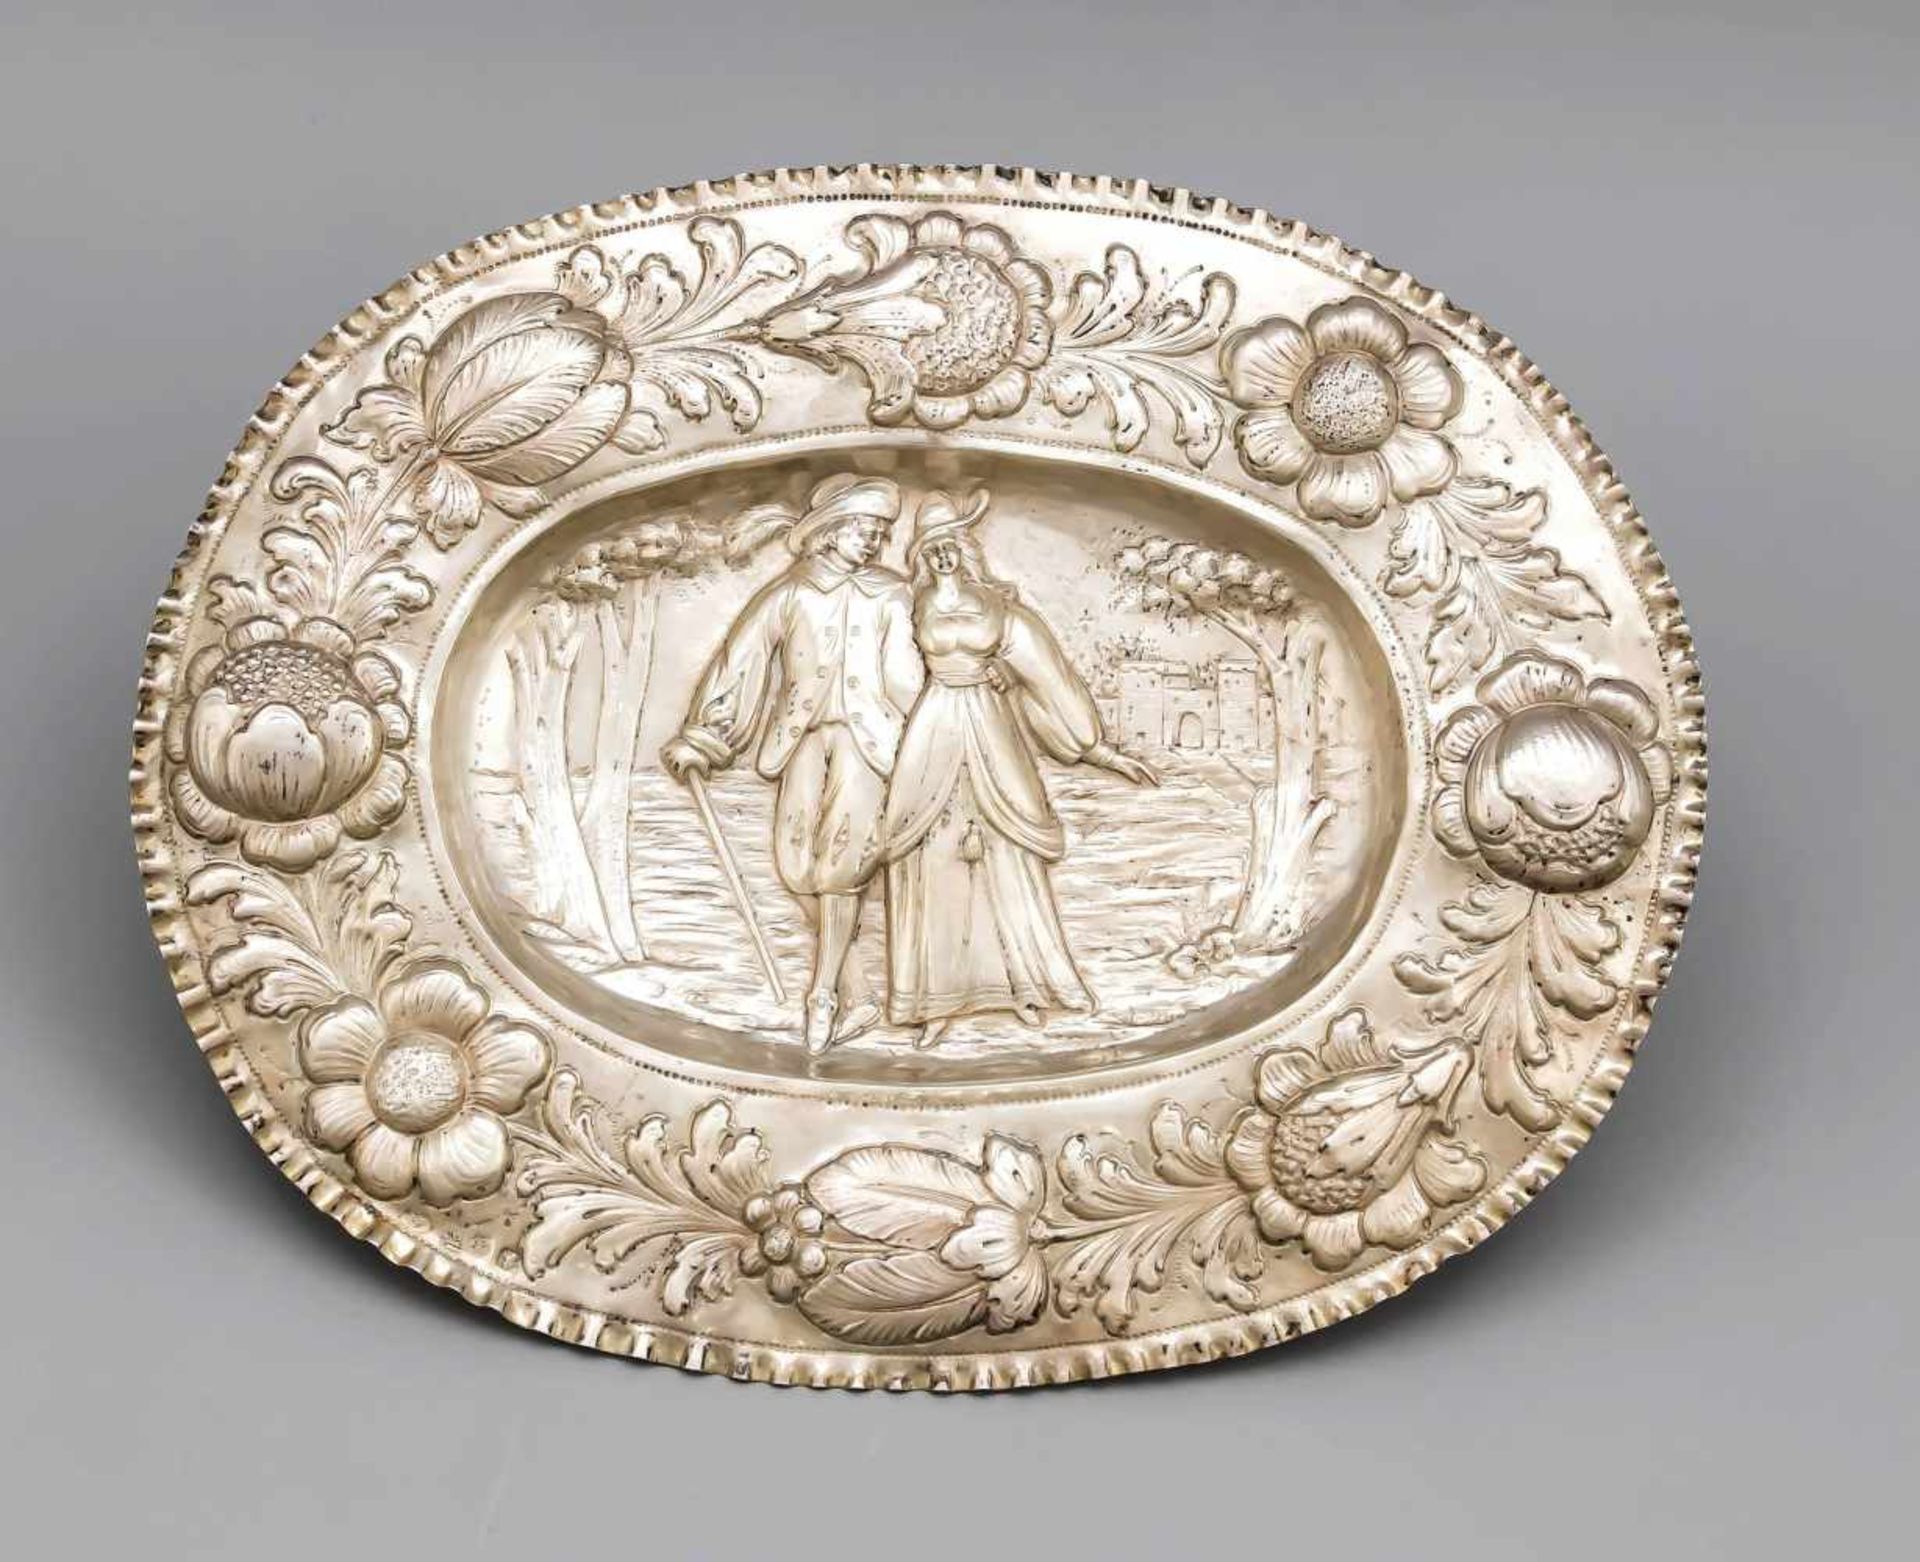 Oval relief plate, probably, German, 19th century, hallmarked, silver 13 (812.5/000), wide